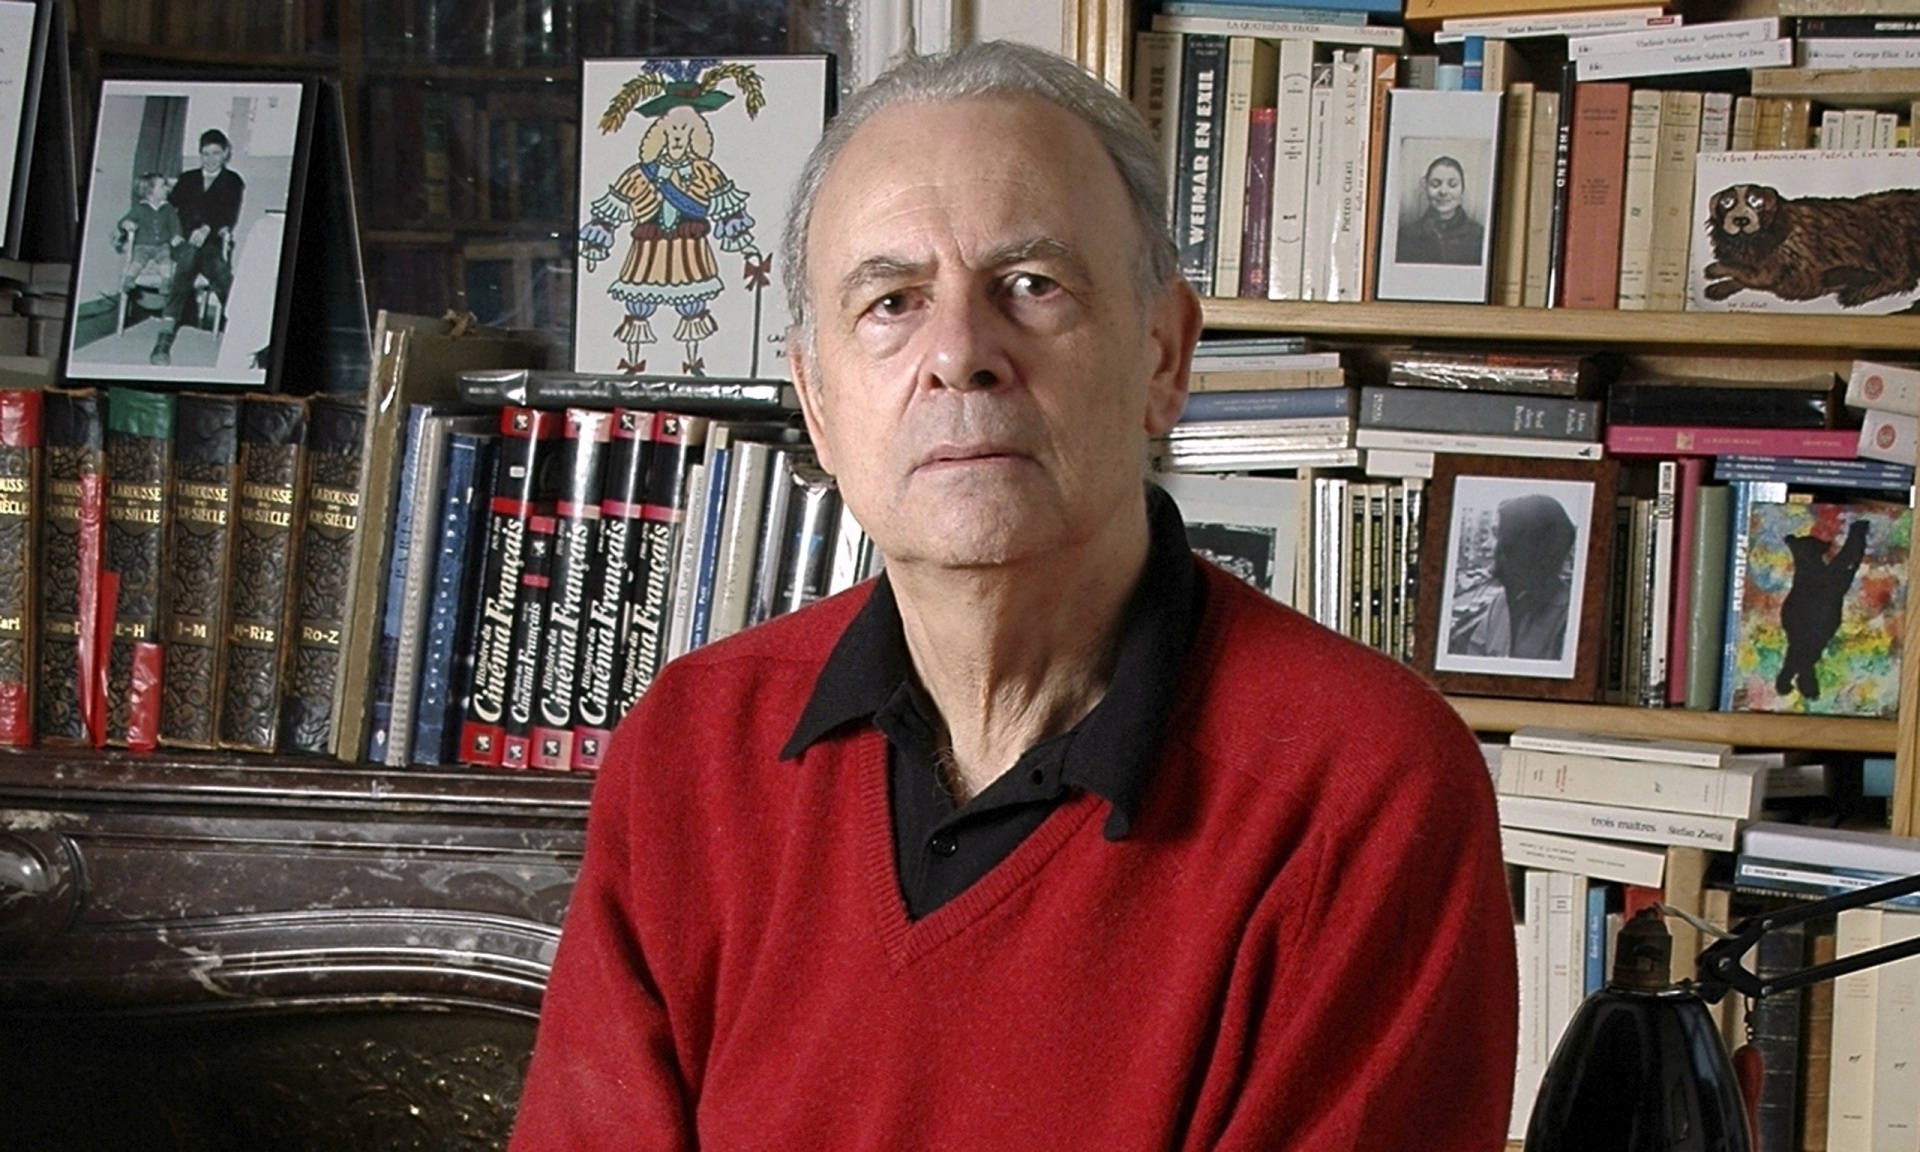 Photo of Patrick Modiano, winner of the 2014 Nobel prize in literature. [Source: Guardian/AP] http://www.theguardian.com/books/2014/oct/10/patrick-modiano-nobel-prize-literature